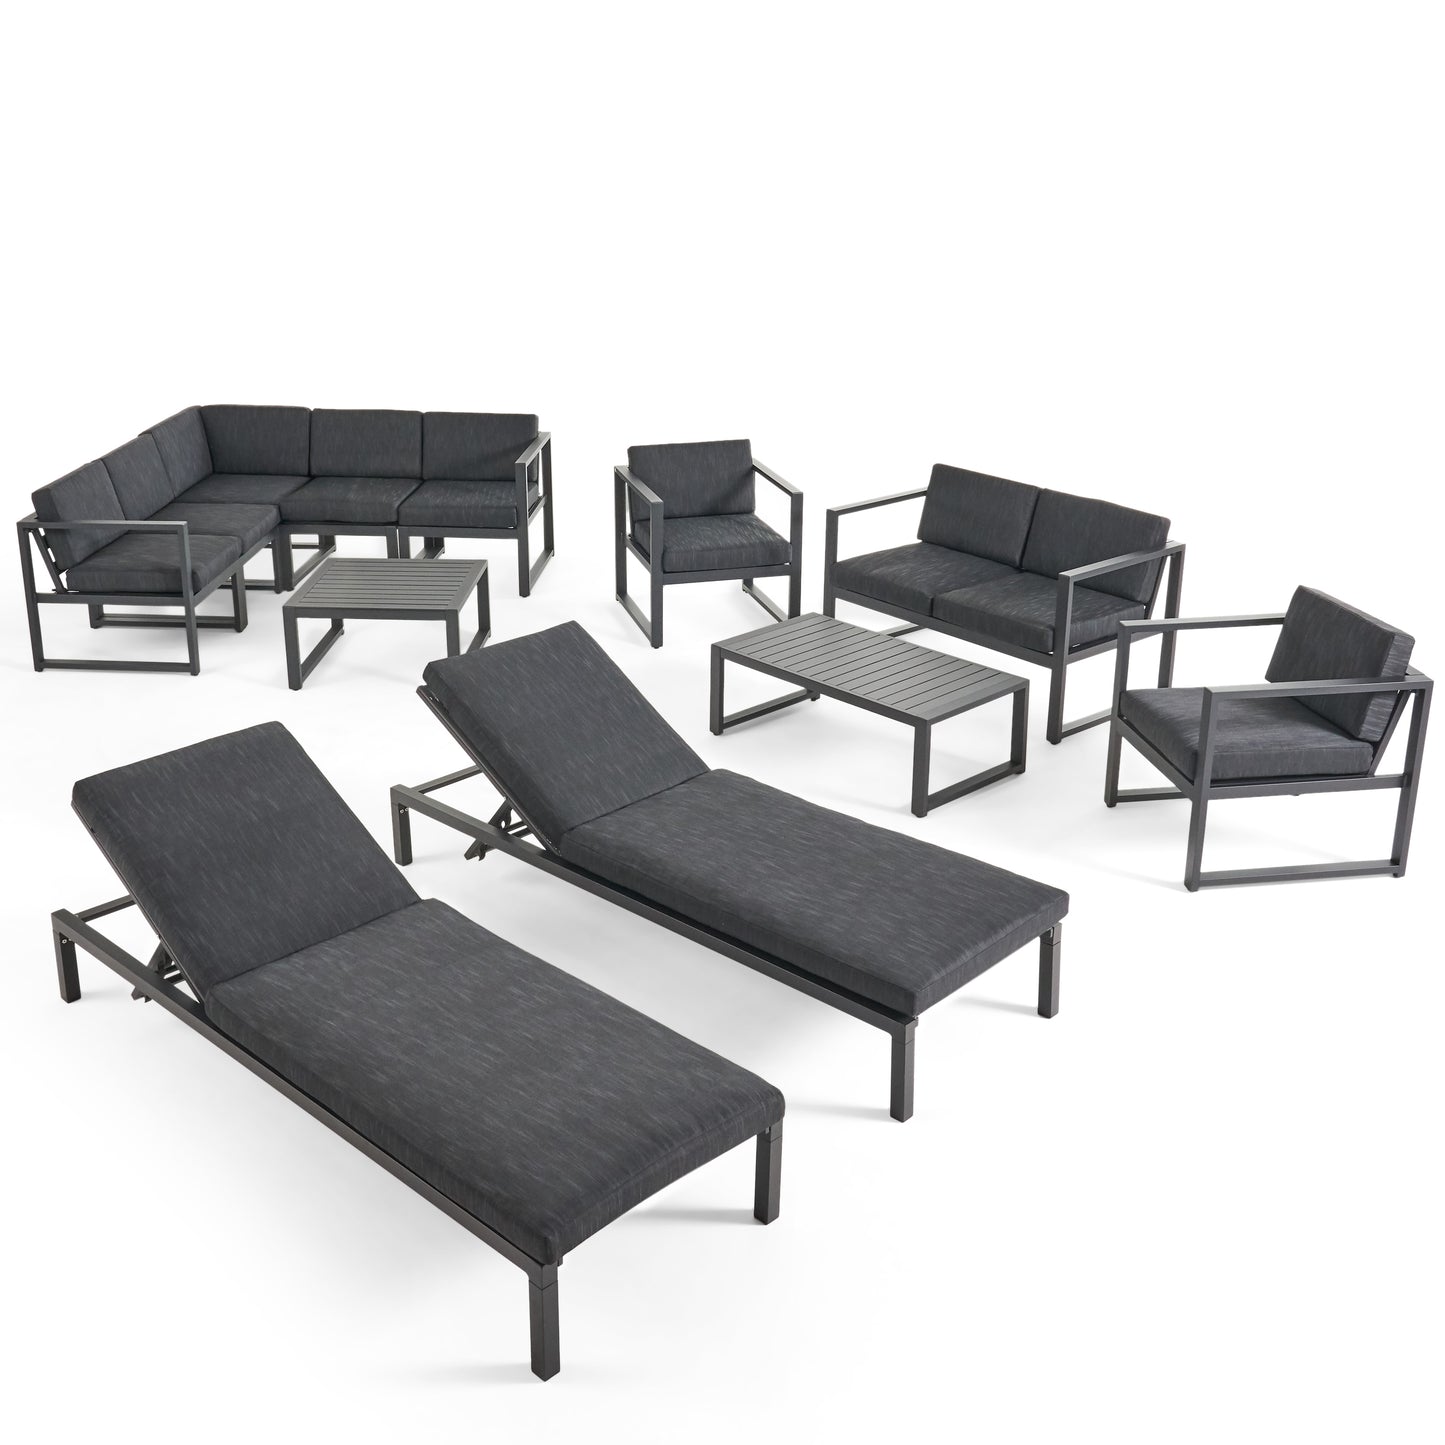 Nealie Outdoor 9 Seater Aluminum Sectional Sofa Set with Mesh Chaise Lounges